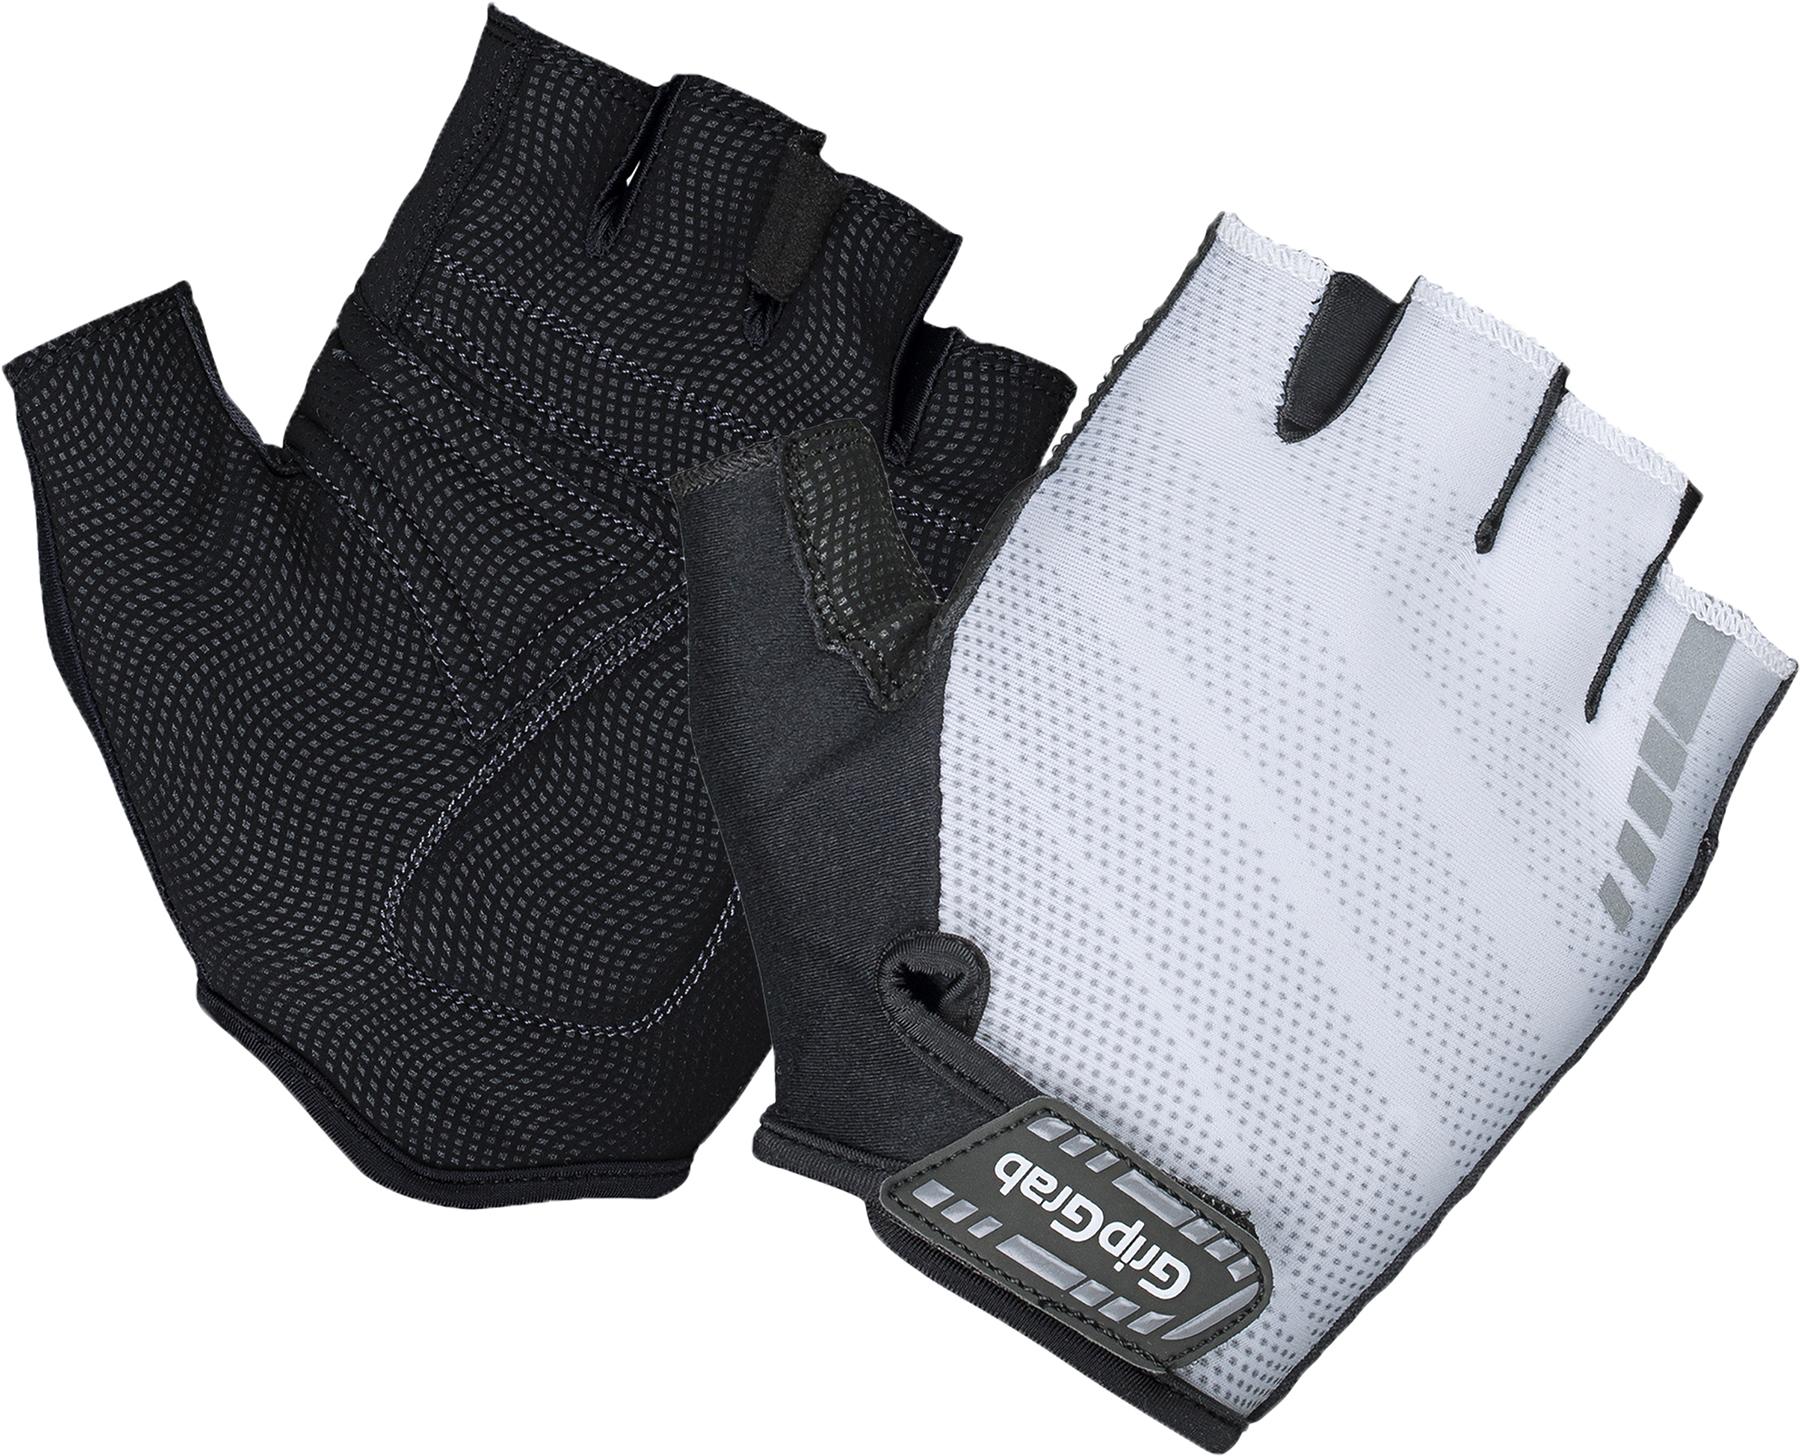 Gripgrab Rouleur Padded Glove  White